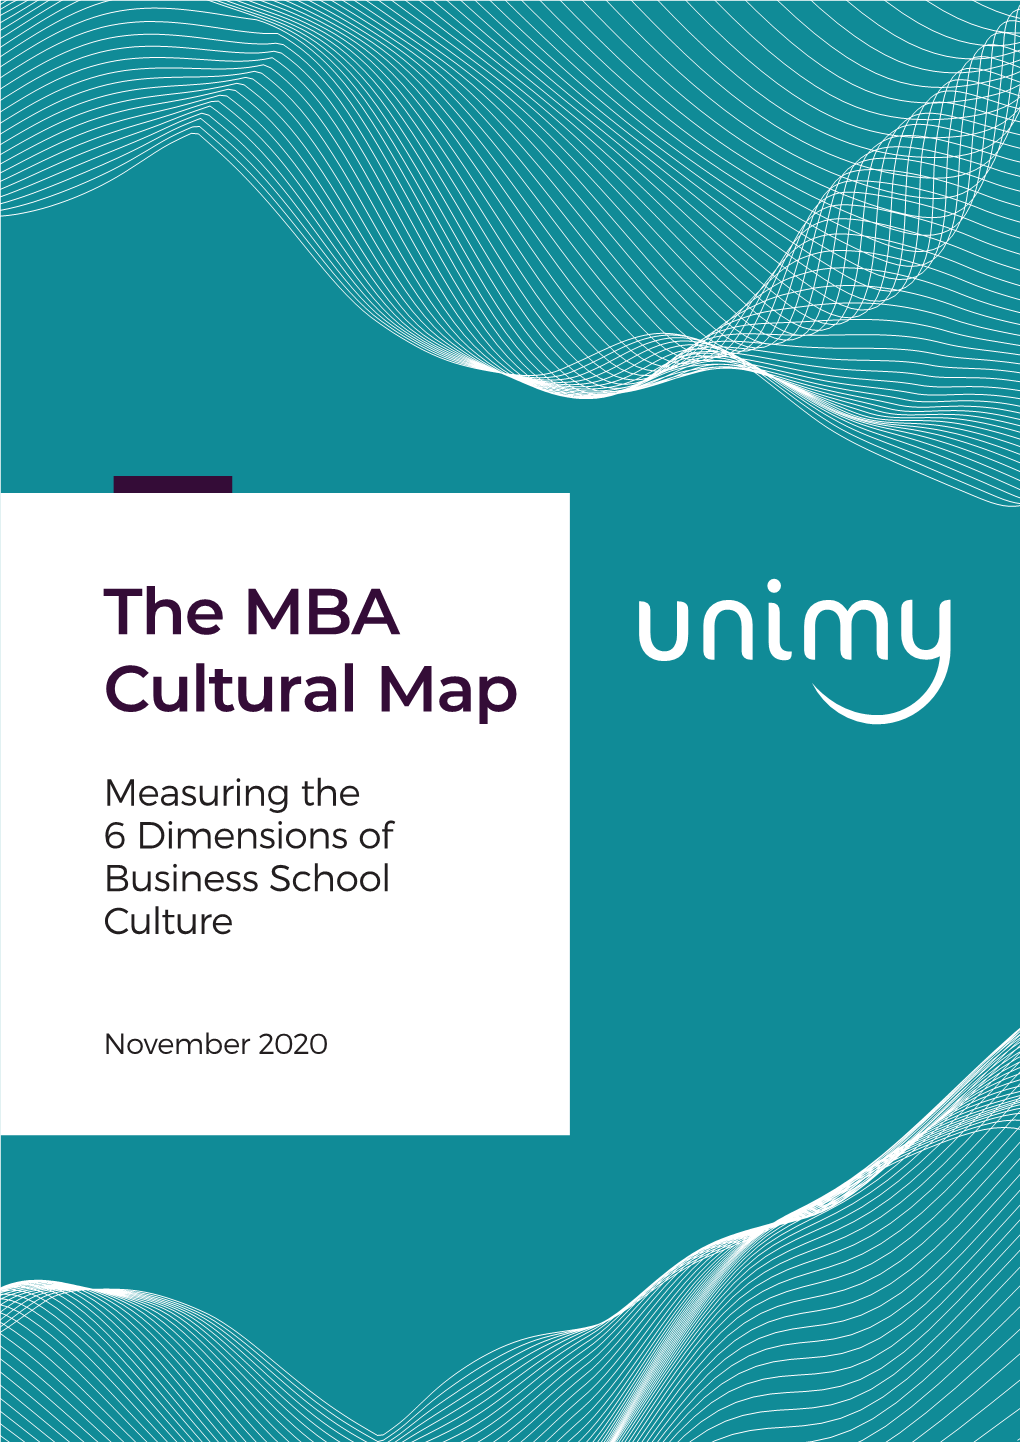 The MBA Cultural Map